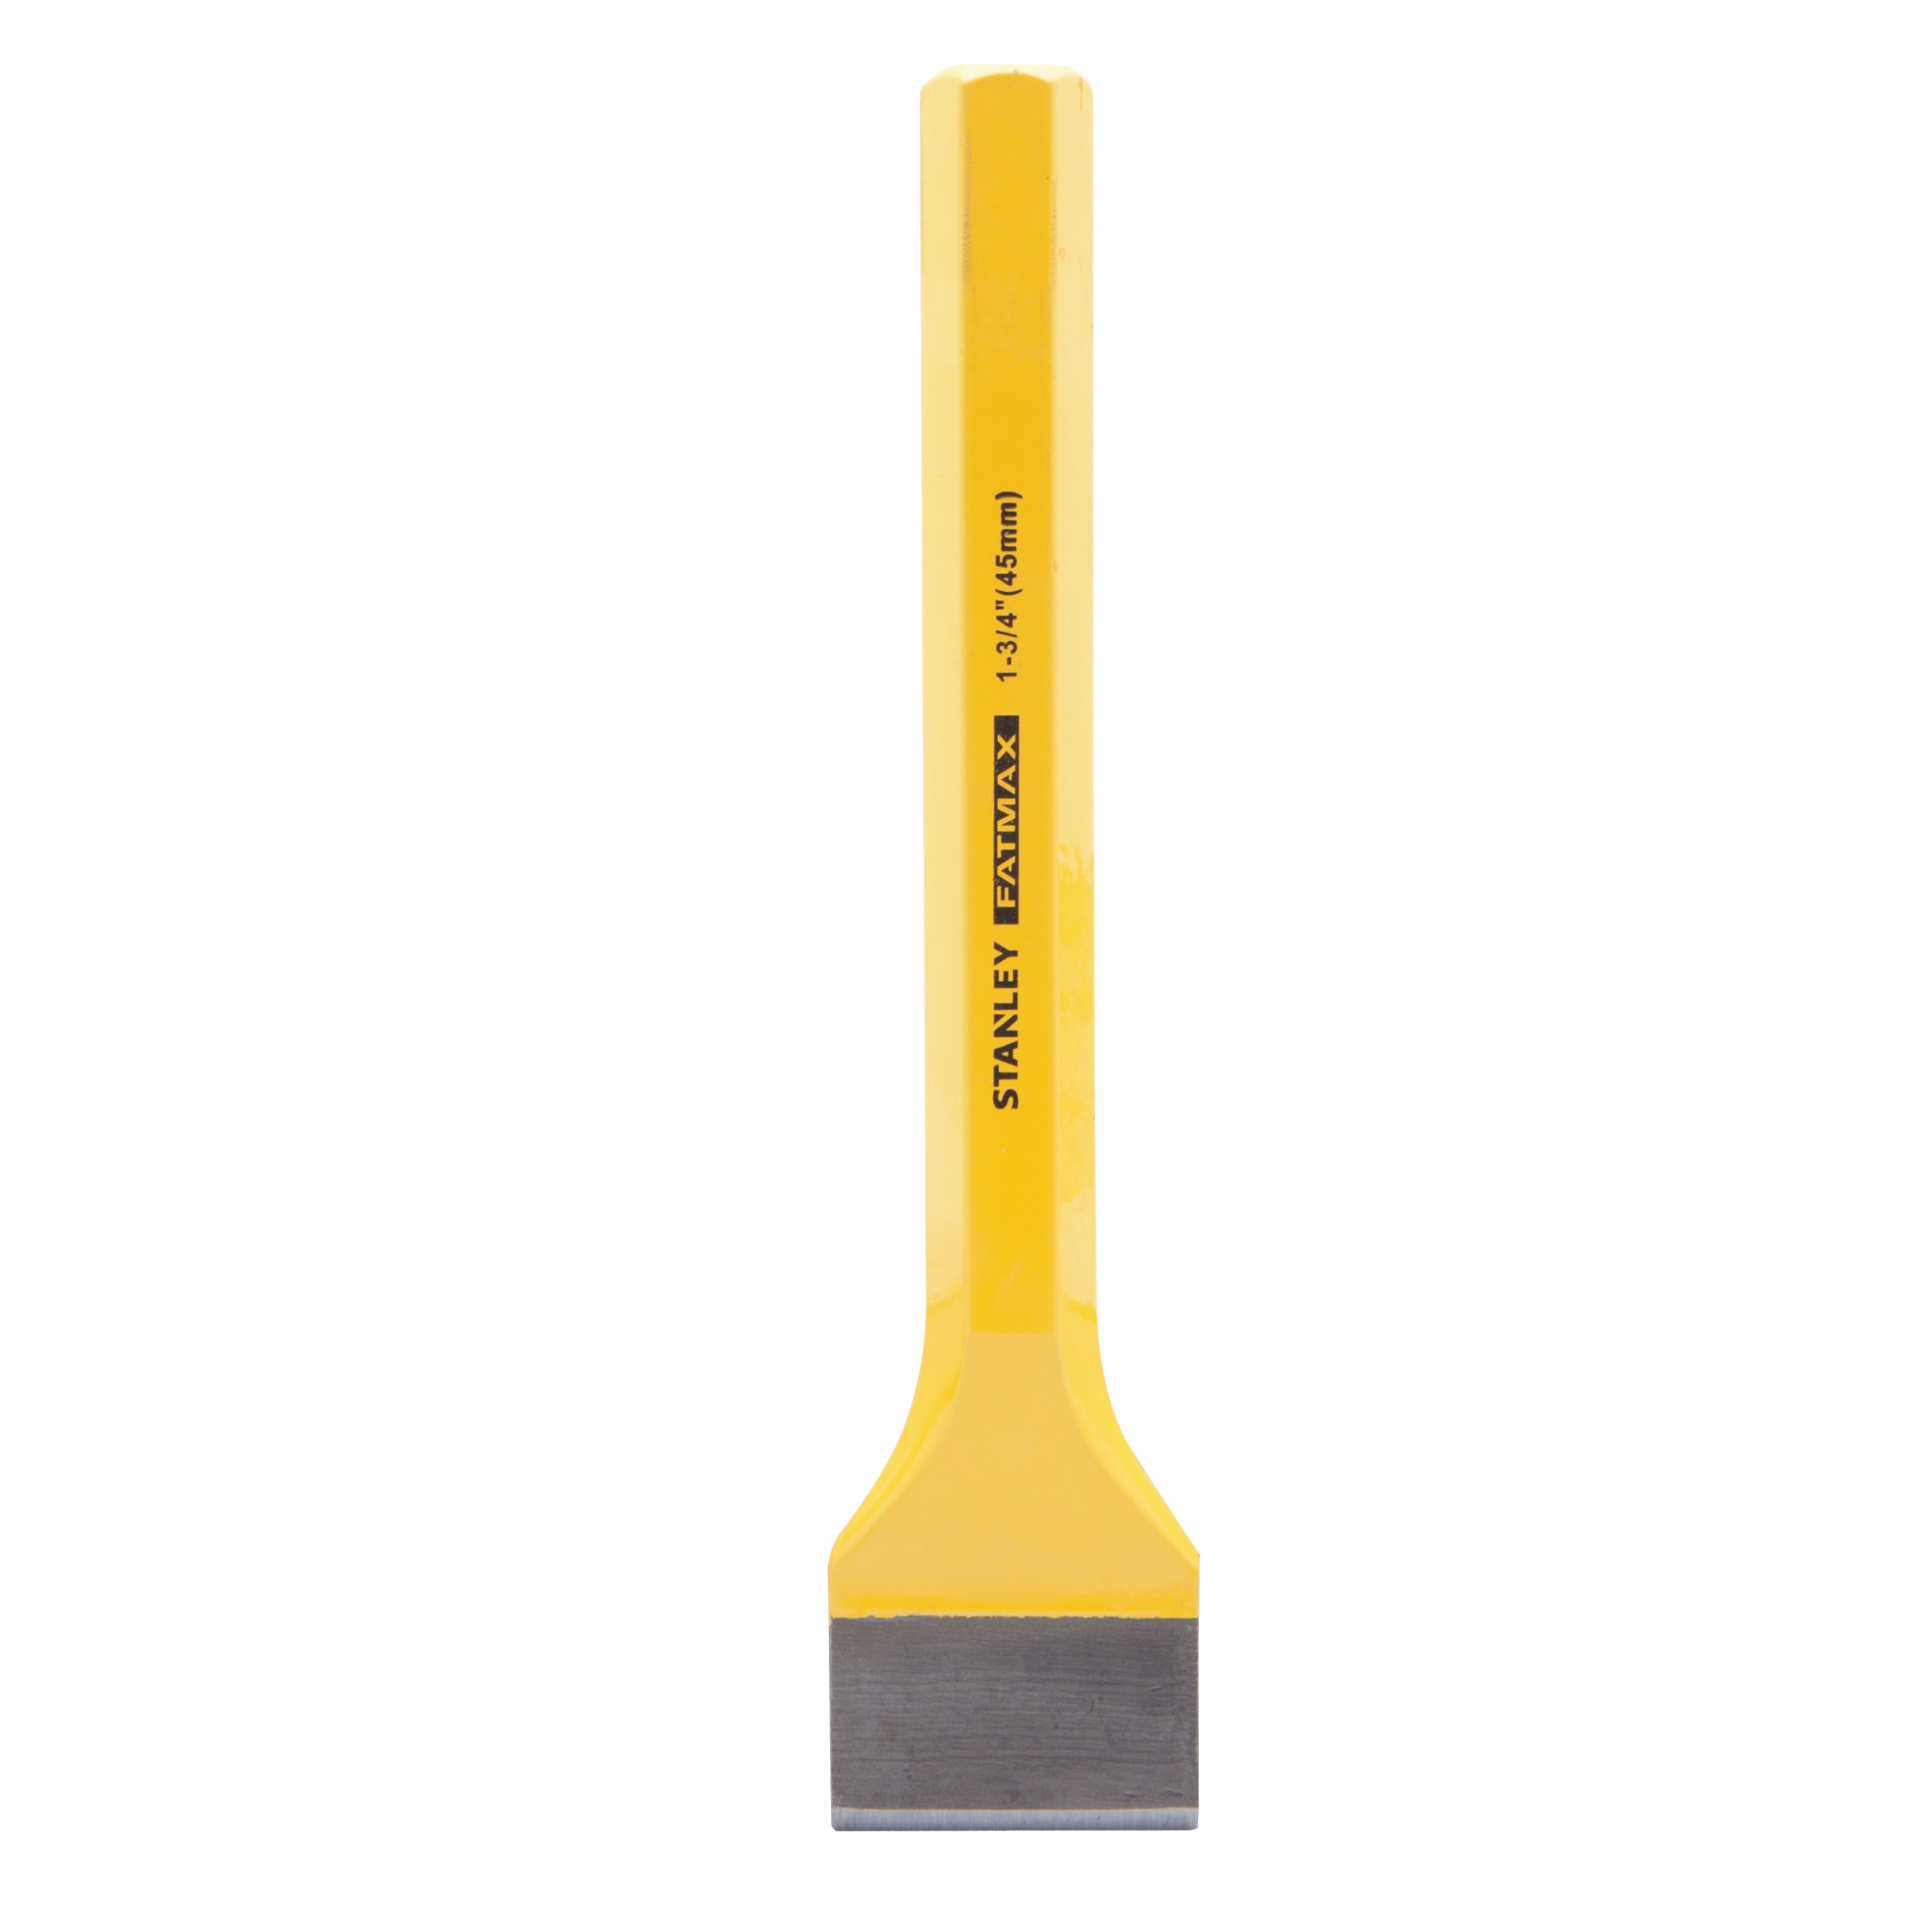 Stanley Tools - 134 in FATMAX Masons Chisel - FMHT16423